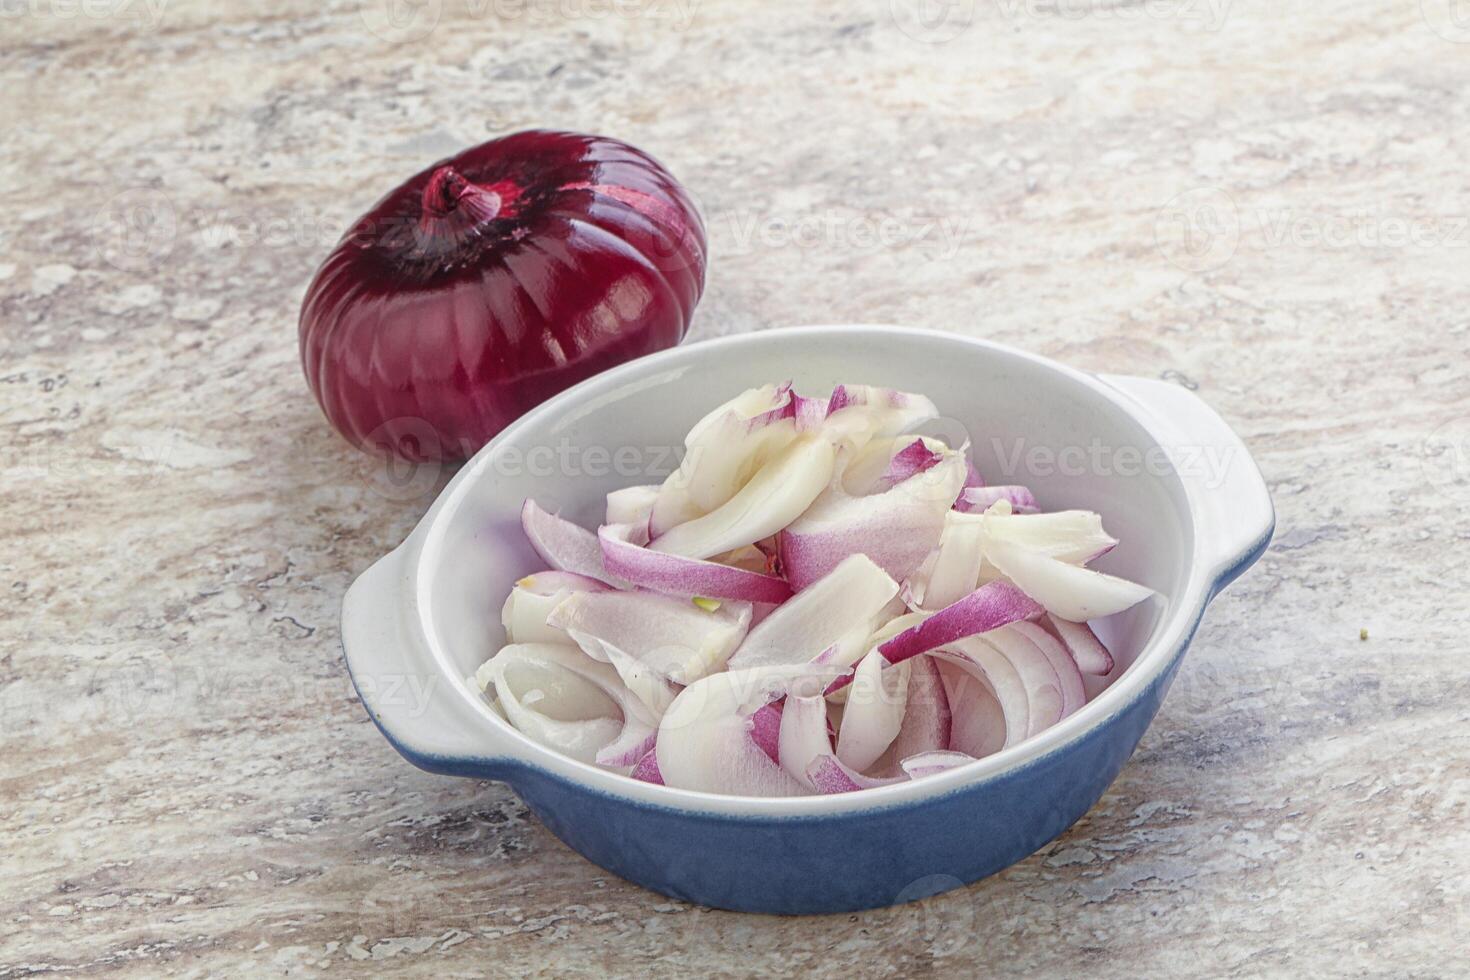 Sliced red onion in the bowl photo